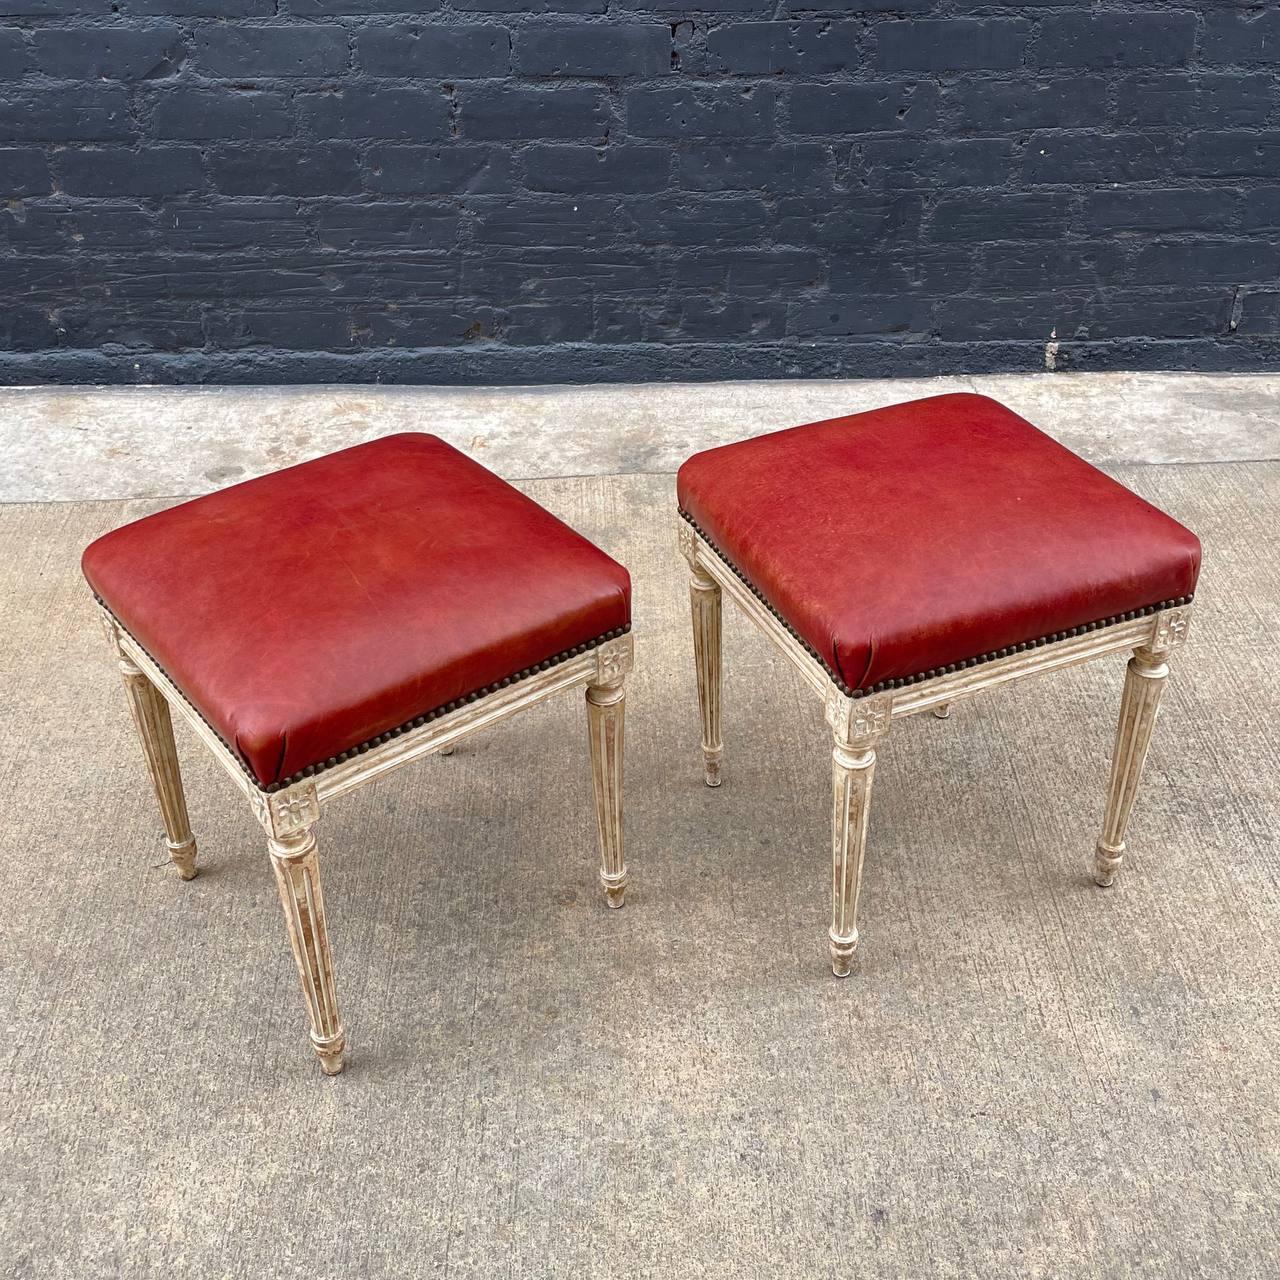 Pair of French Antique Louis XVI Style Hand Carved Stool Benches

Country: France
Materials: Distress Paint Finish, Original Leather
Style: French Antique
Year: 1920s

Dimensions 
19”H x 16”W x 16”D